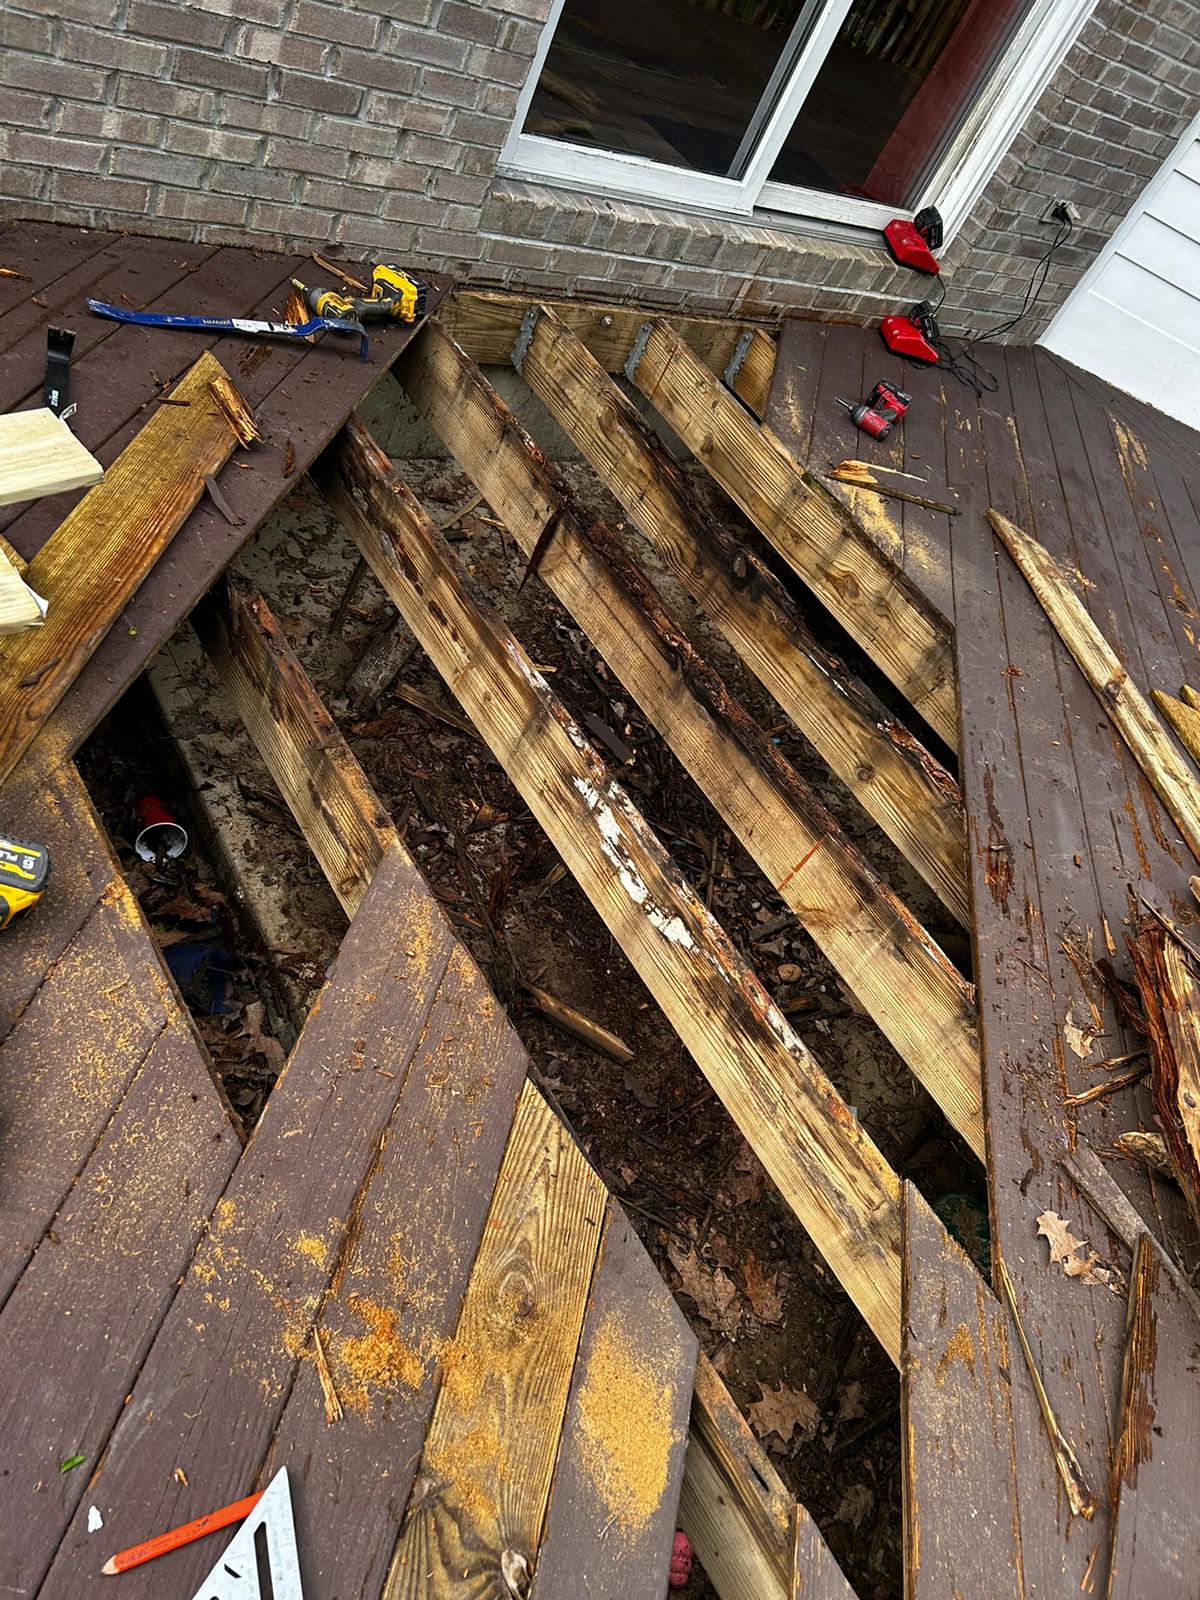 picture shows a deck floor with a section of boards removed and its obvious they were rotten because the joist are exposed and they have rot, the area is big but not huge making up about 7 or 8 deck boards in width and length. The purpose is to shpow there was floor board rot and underneath joist rot to the deck